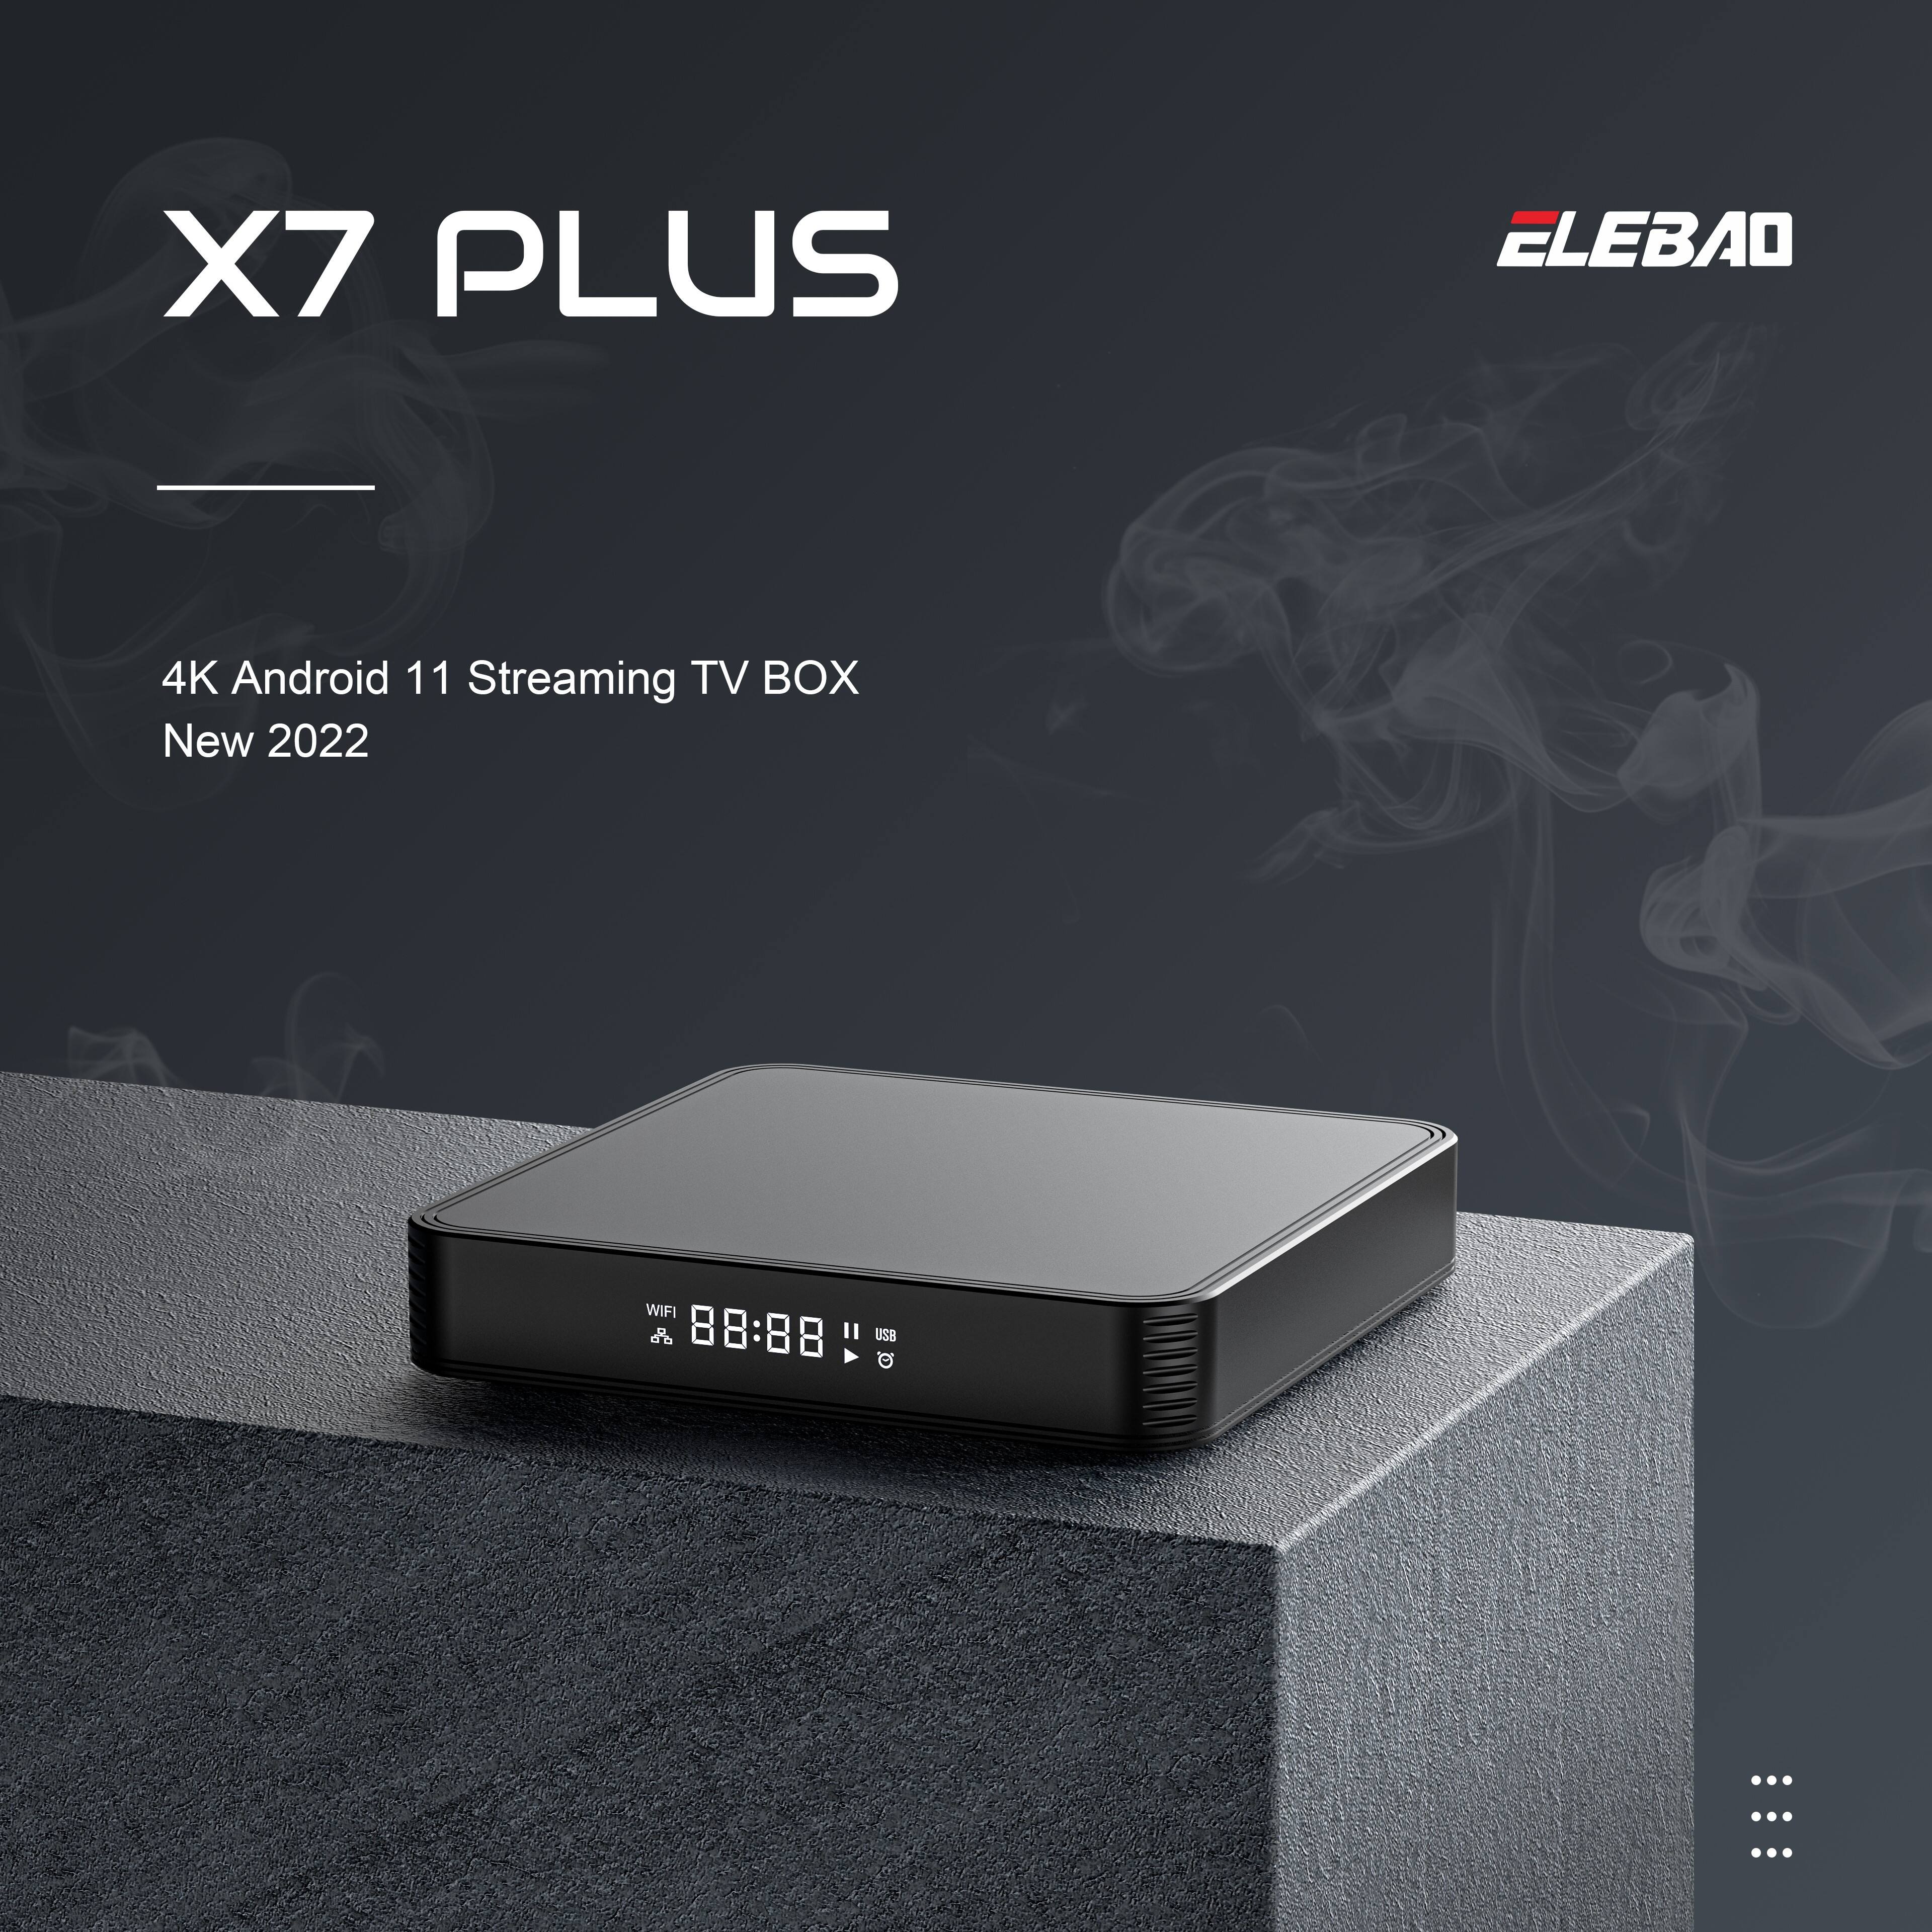 Elebao New Arrival Gigaibit Lan Android TV Box X7plus S905X4 Android 11.0 OS OTT TV Box supplier